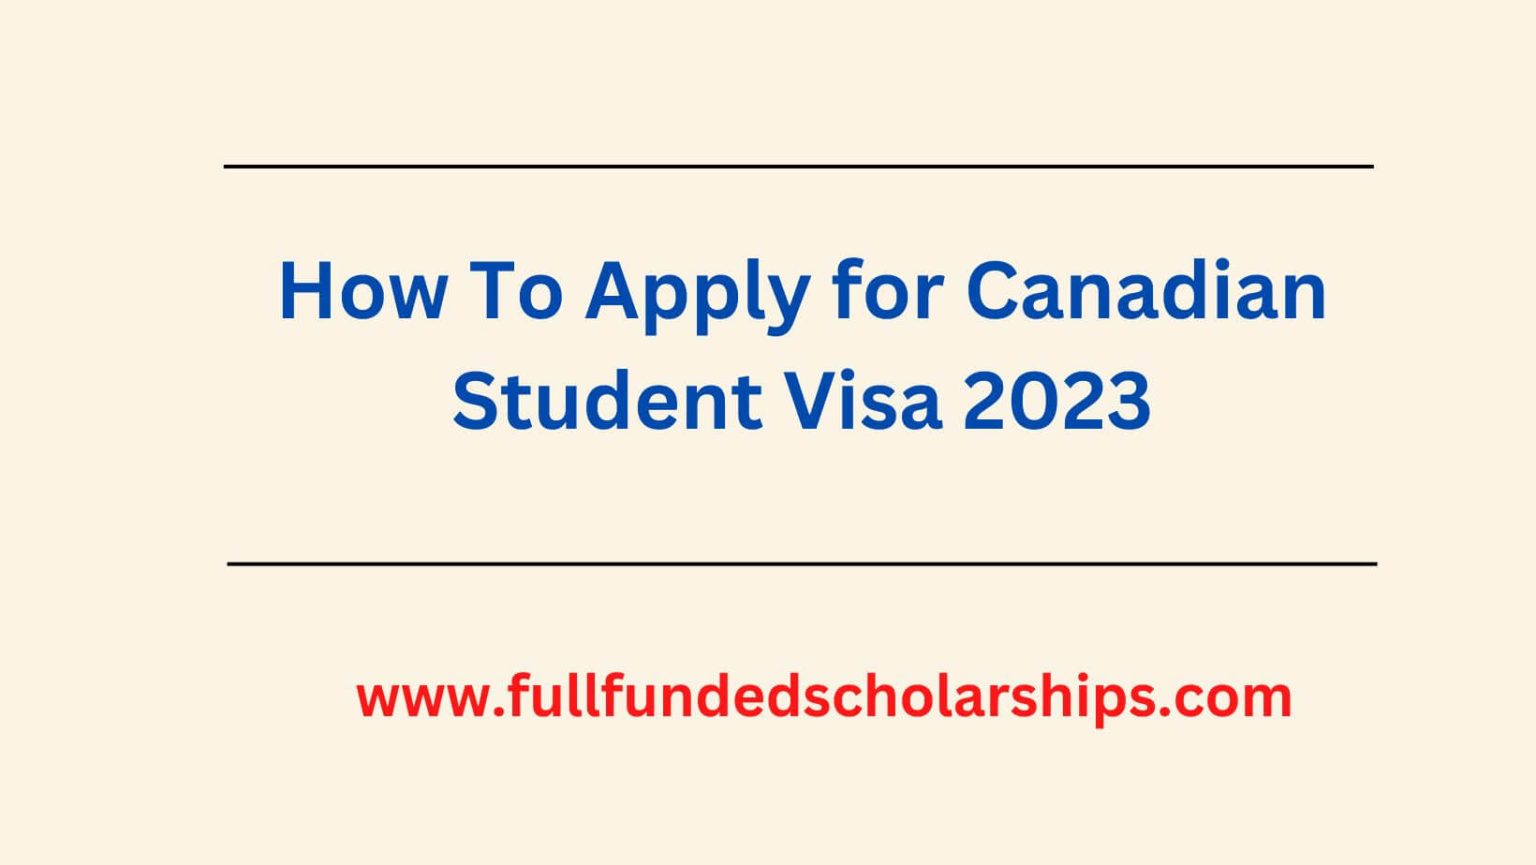 How To Apply For Canadian Student Visa 2023